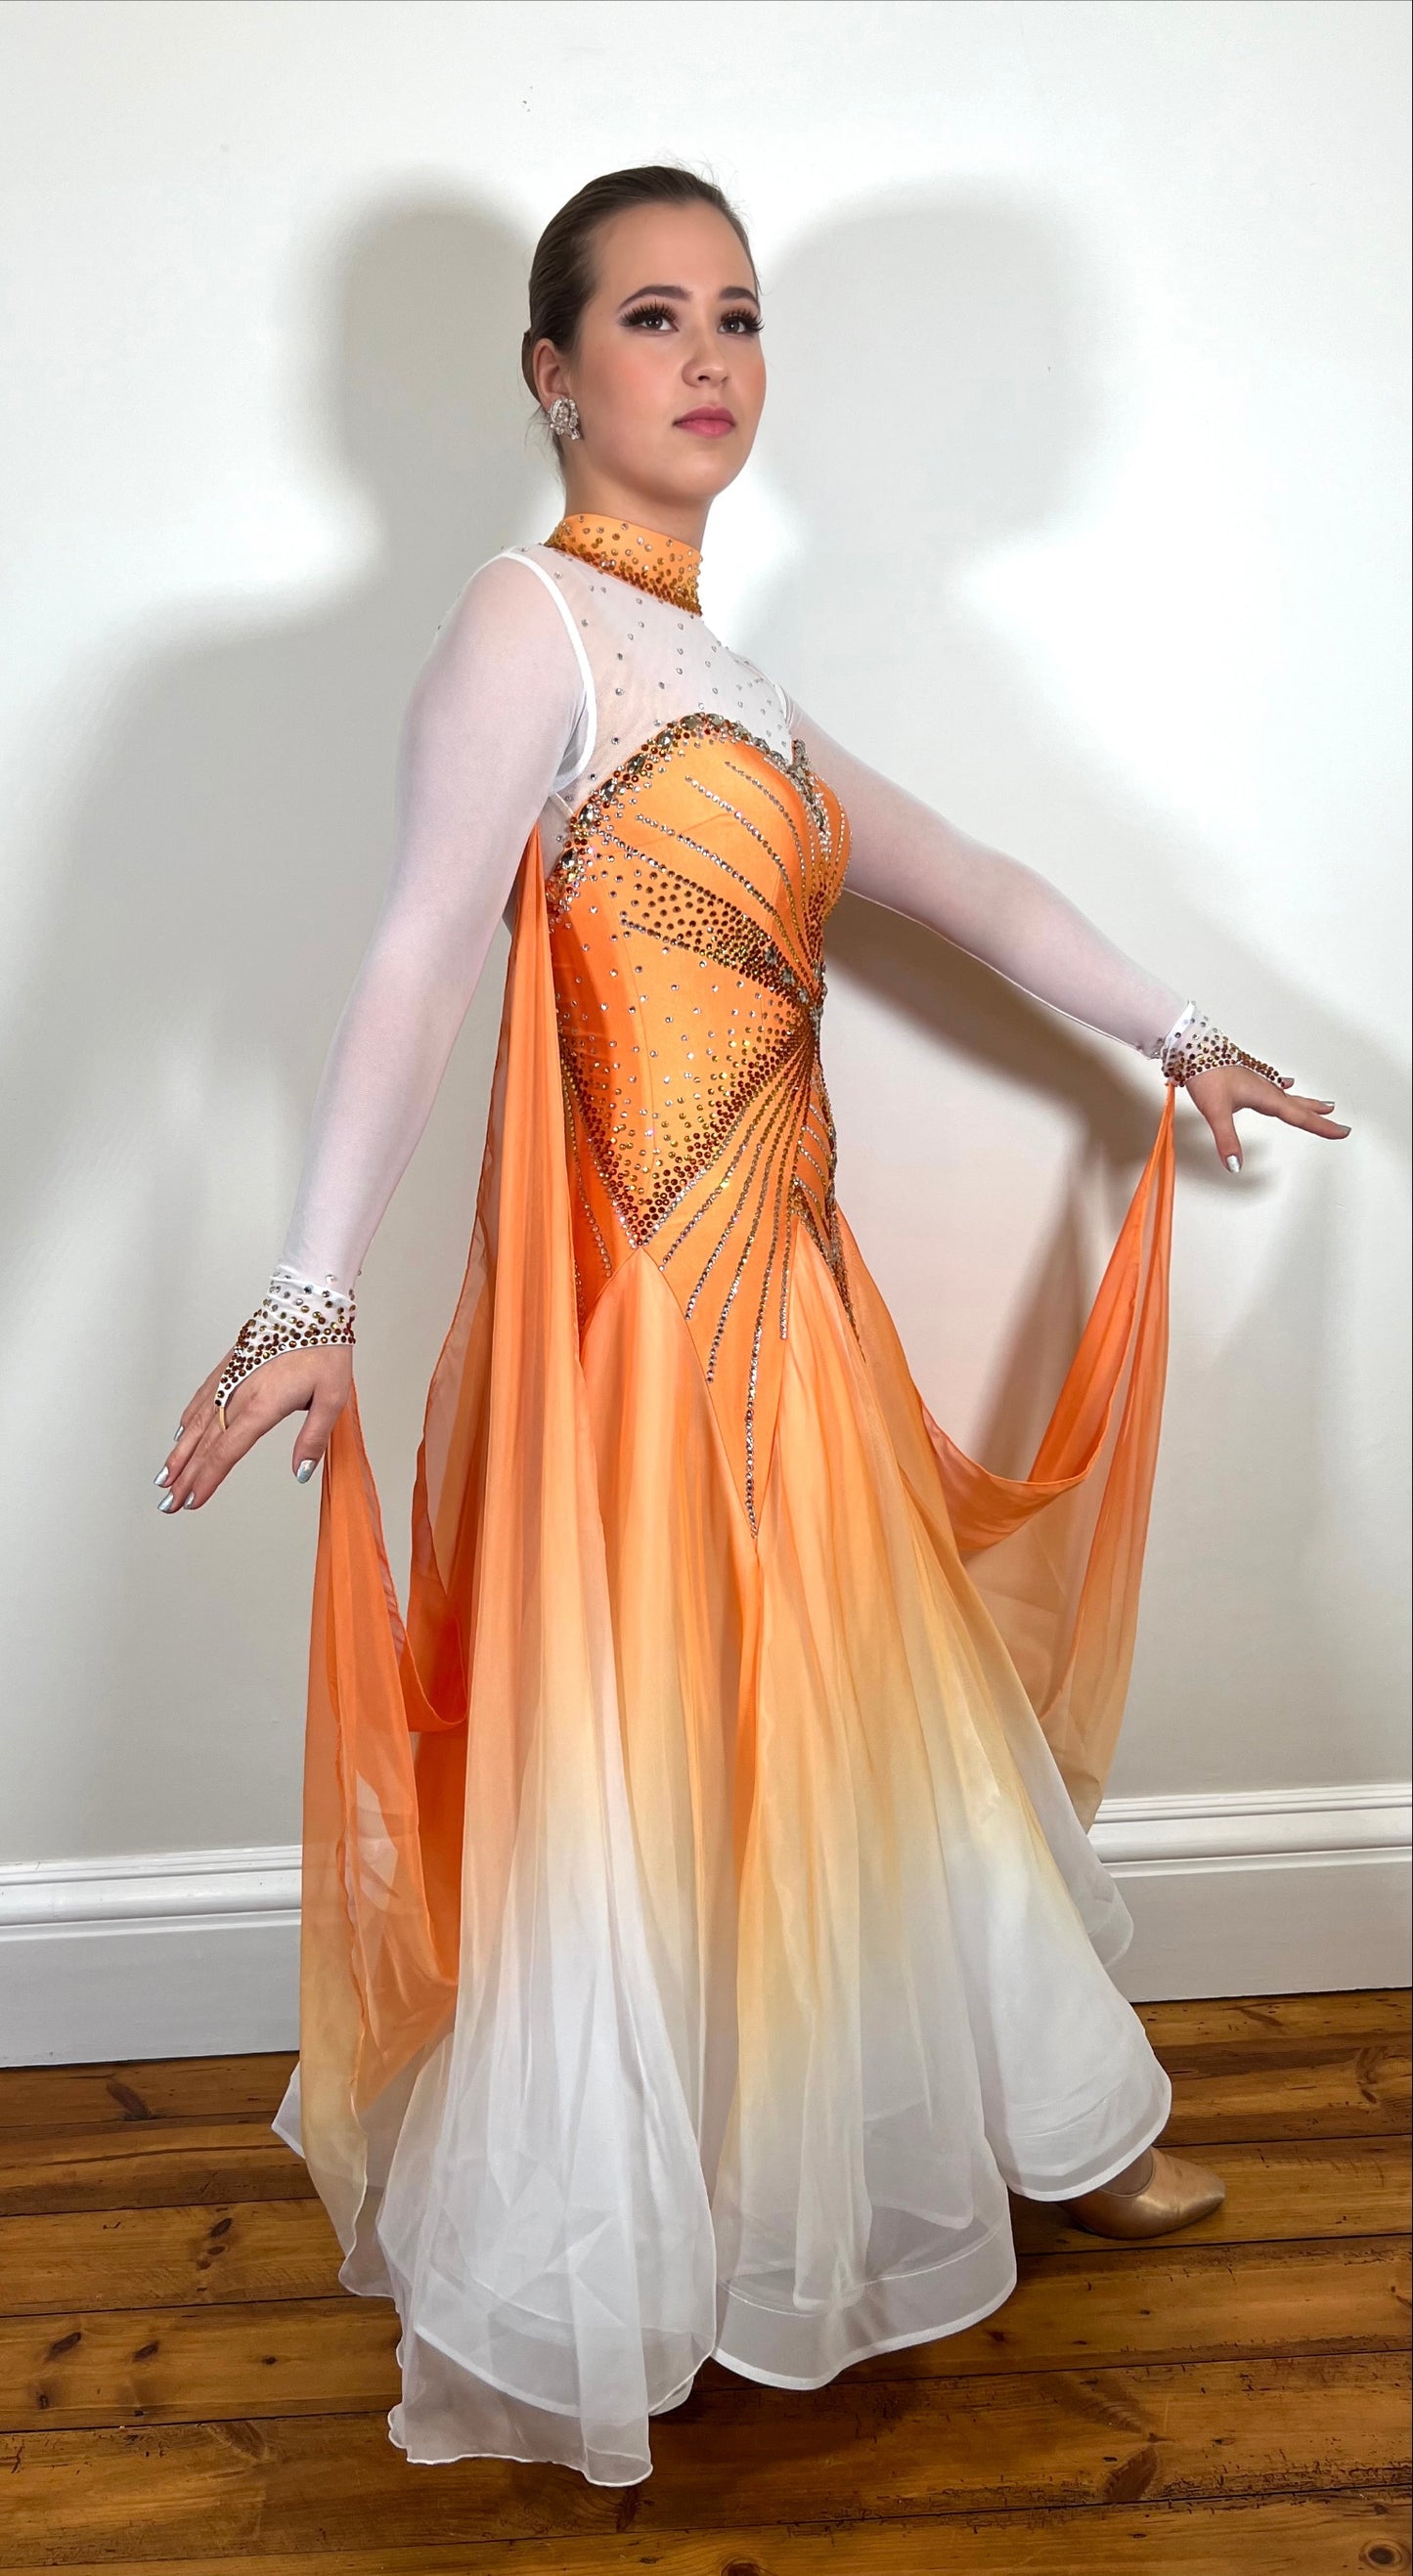 031 Pale Orange & White Ombré Ballroom Dress. Decorated in Smoked Topaz, Light Colorado topaz & crystal. High neck design with keyhole feature to the back. Ombré floats to the sleeves.